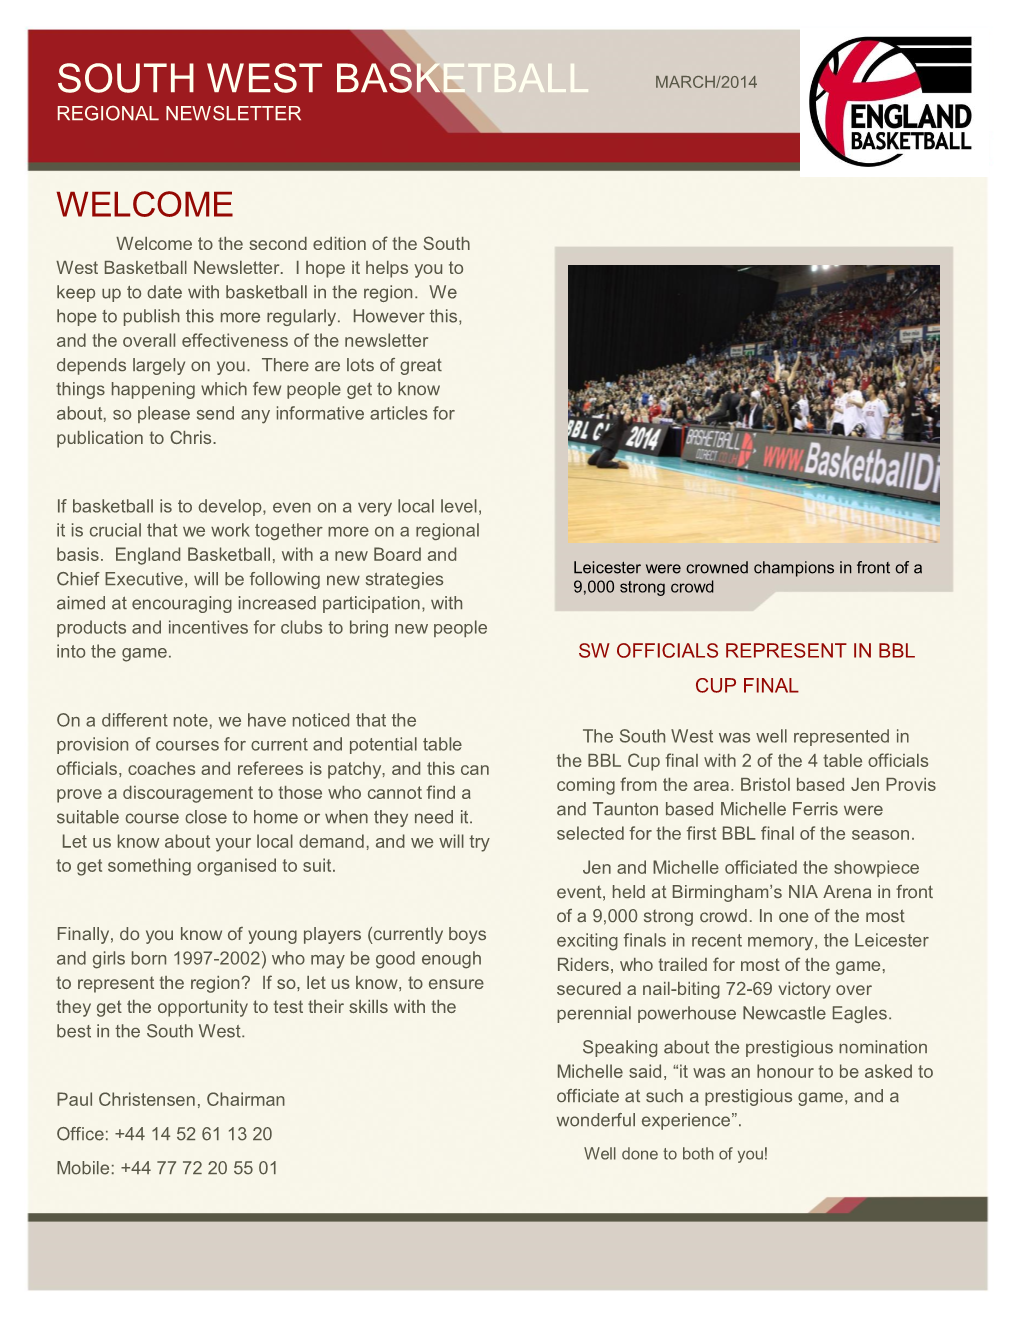 South West Basketball March/2014 Regional Newsletter